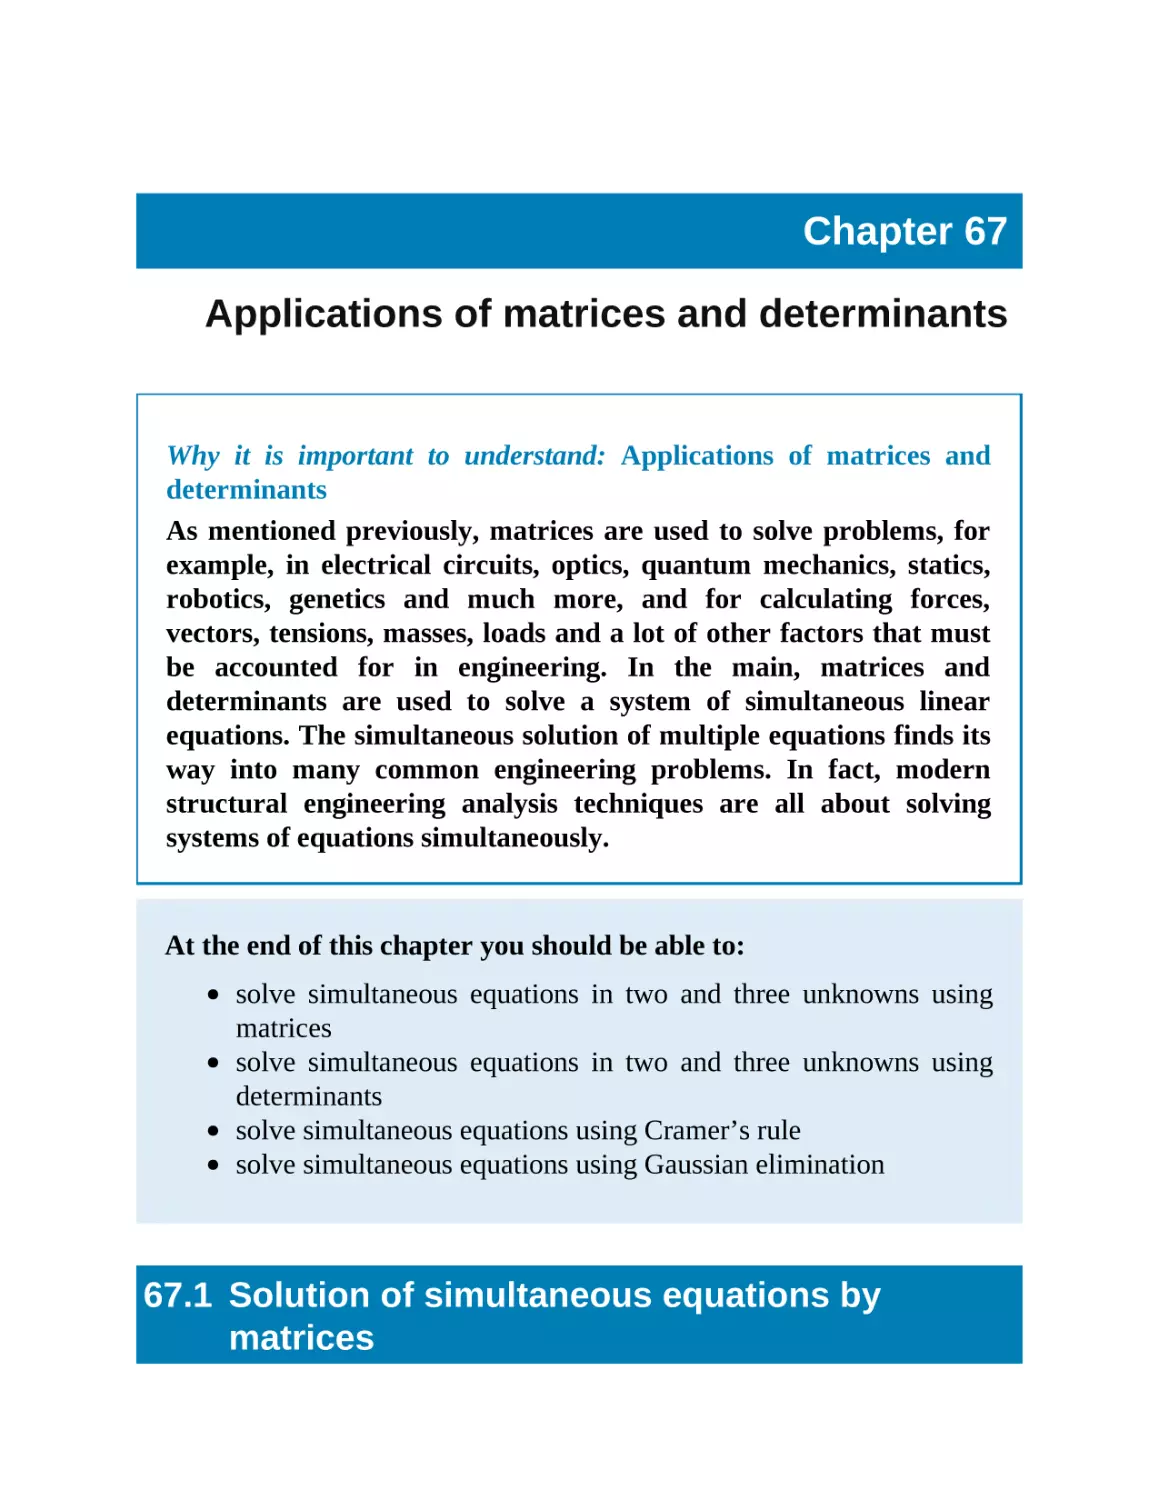 67 Applications of matrices and determinants
67.1 Solution of simultaneous equations by matrices